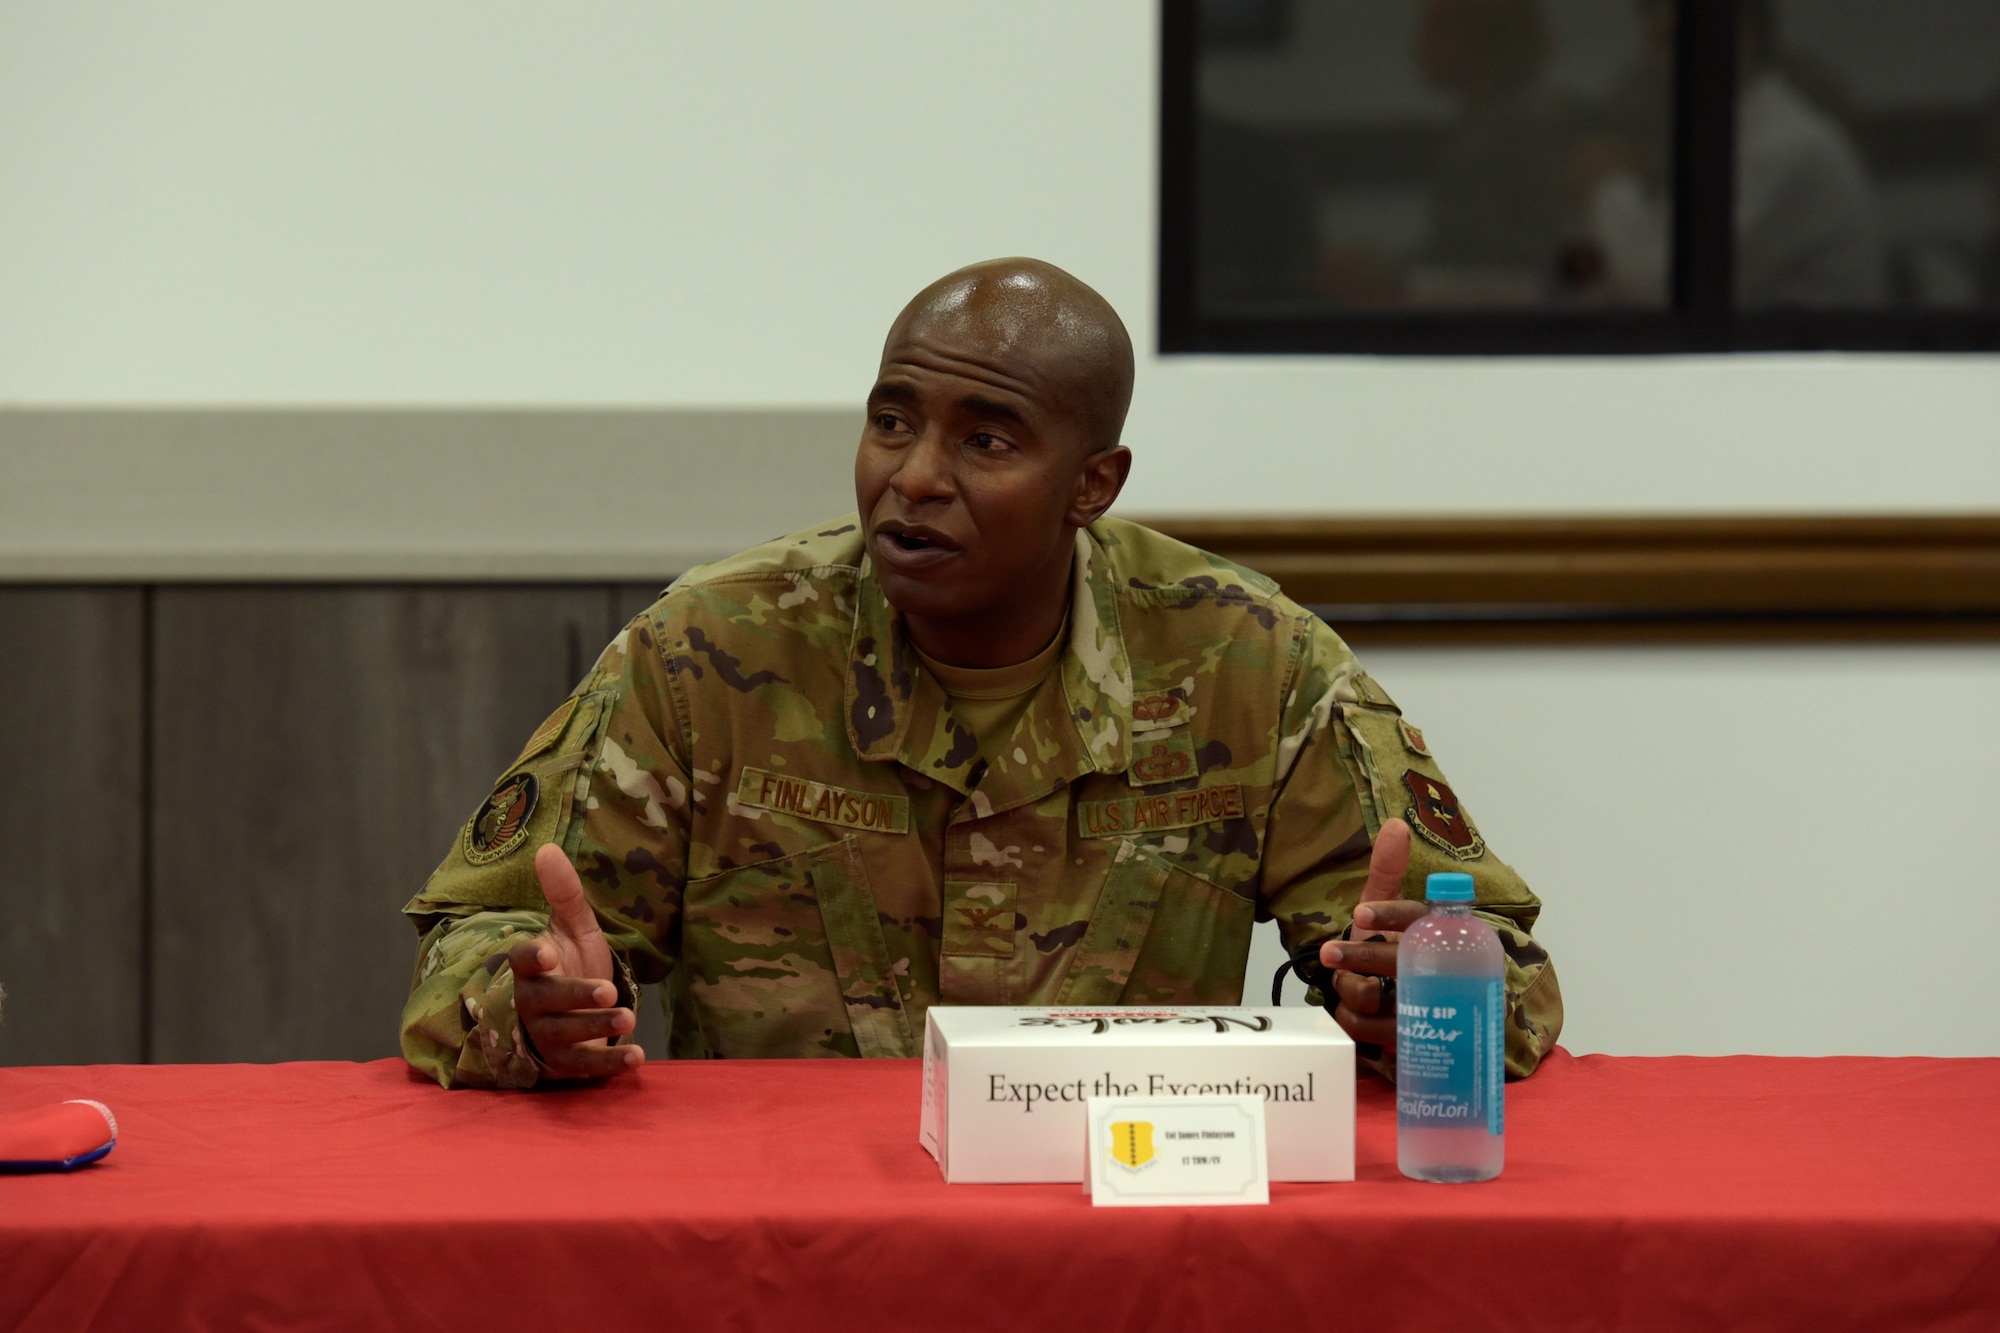 U.S. Air Force Colonel James Finlayson, 17th Training Wing vice commander, addresses members of the San Angelo City Council during a lunch at the Cressman Dining Facility on Goodfellow Air Force Base, Texas, July 2, 2020. During the lunch, future plans such as the Air Force Ball, Military Appreciation Day, and other events the community aids in were discussed. (U.S. Air Force photo by Senior Airman Zachary Chapman)